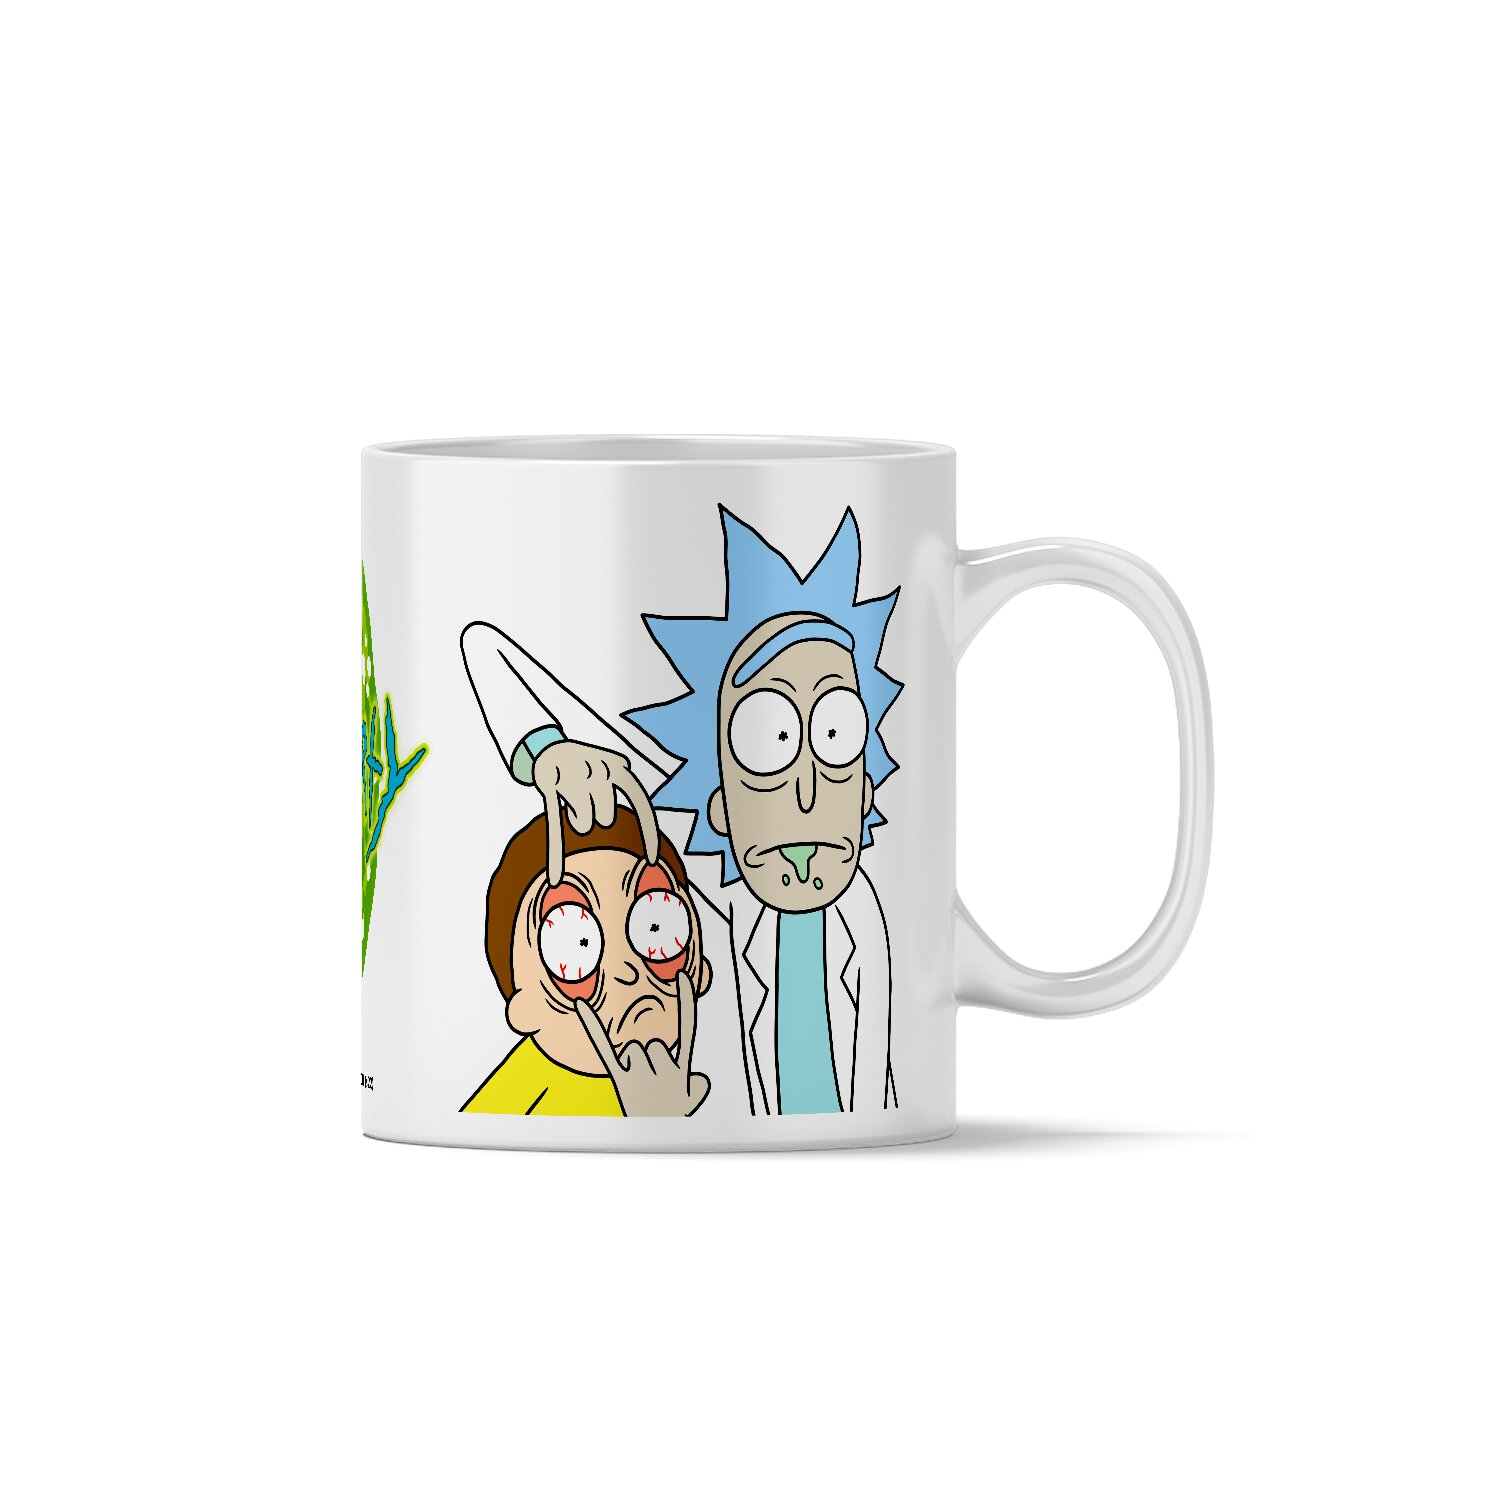 Rick Kaffee- Morty 330ml und Morty and Teebecher 007 Muster